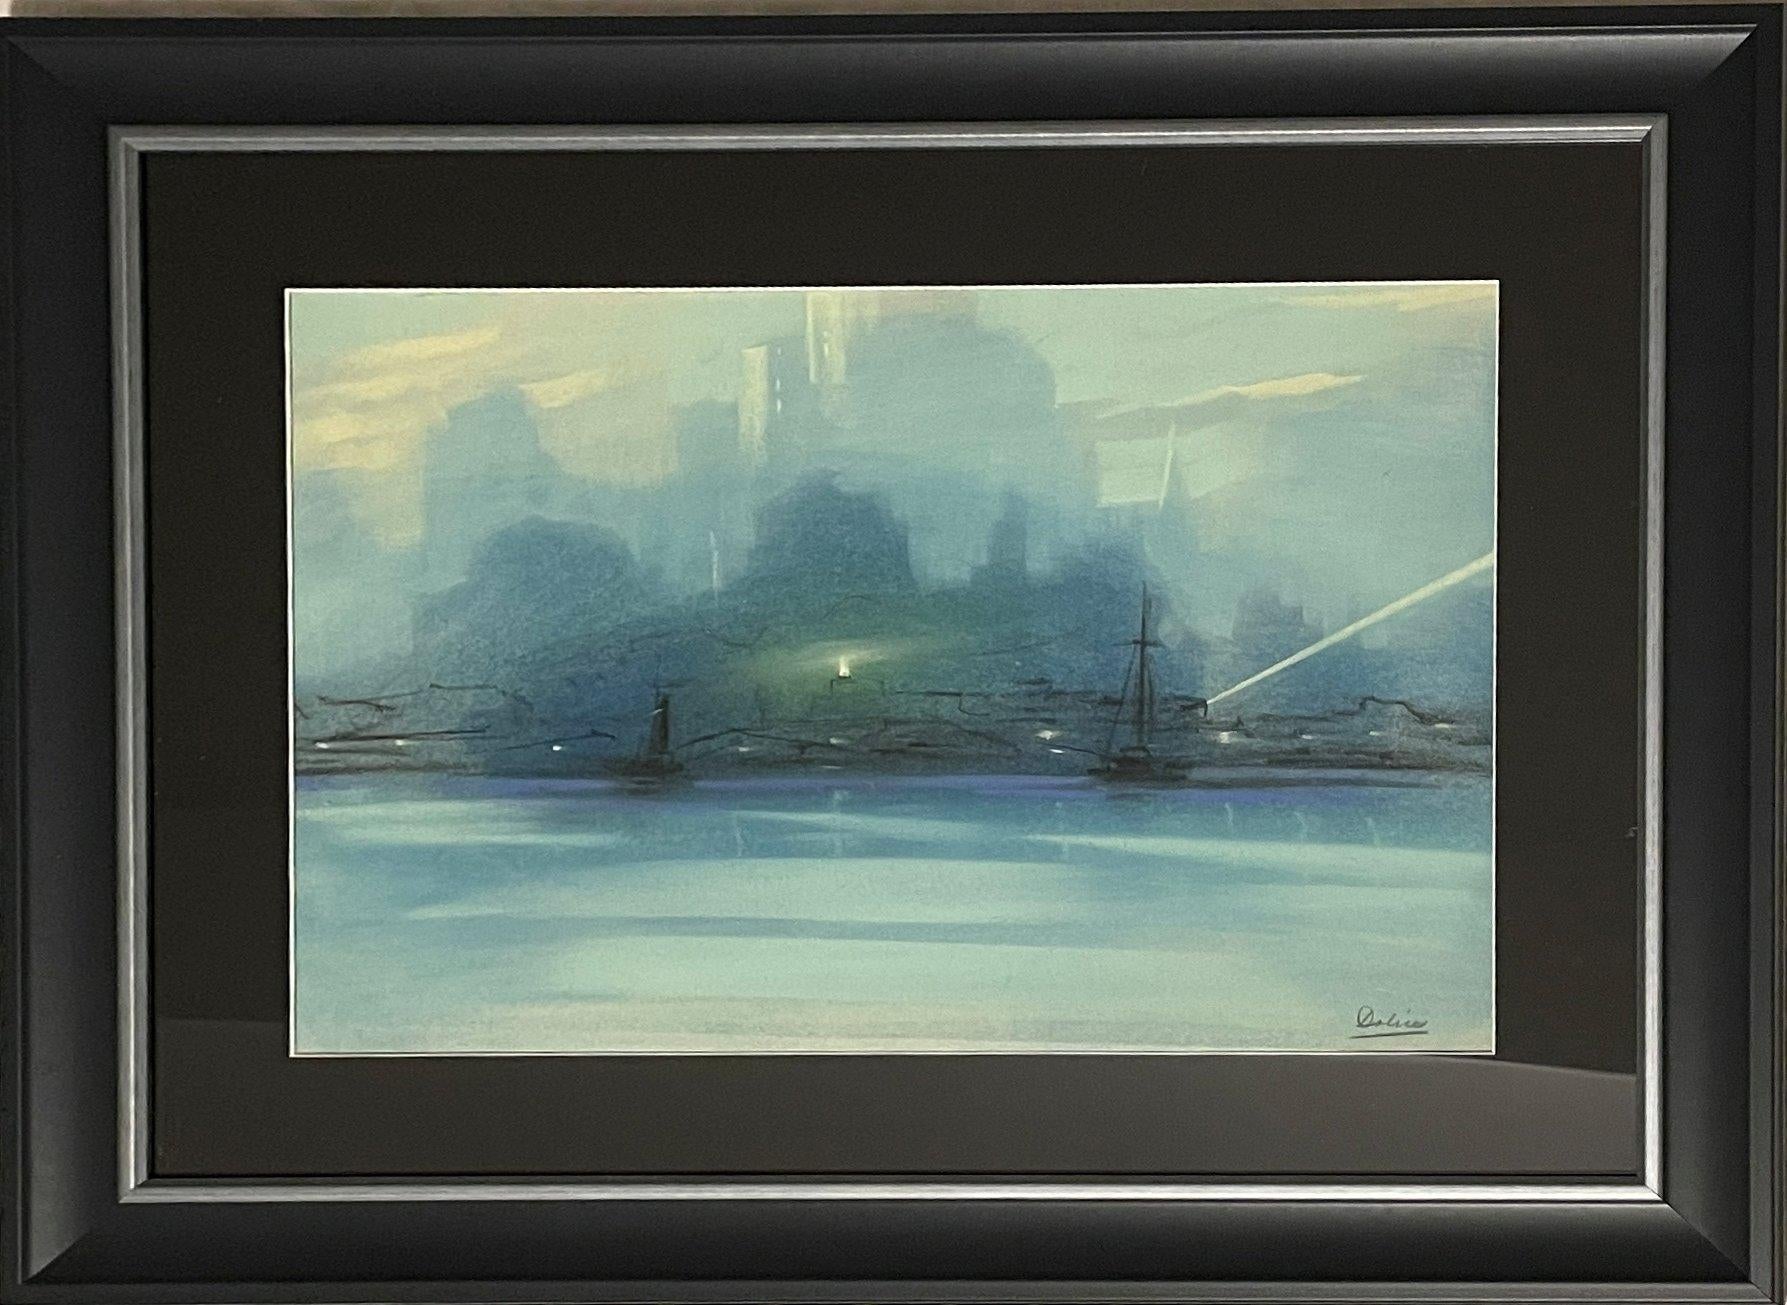 Leon Dolice (1892 - 1960)
New York Harbor Skyline at Twilight
Pastel on paper
12 x 19 inches
Signed lower right

Provenance:
Spanierman Gallery, New York

The romantic backdrop of Vienna at the turn of the century had a life-long influence upon the